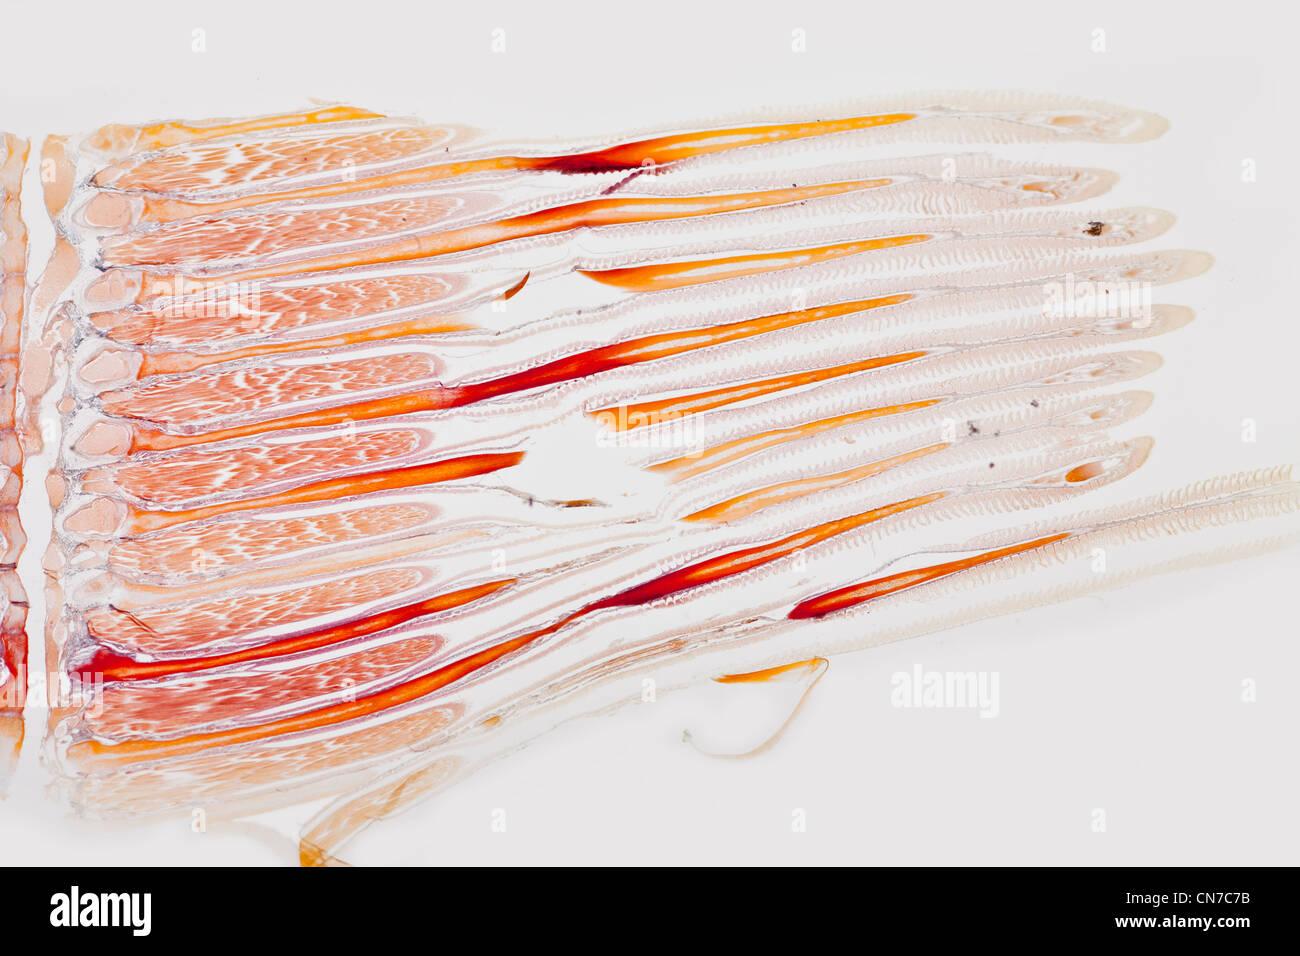 Gill section from a Pike fish (Esox sp.) brightfield photomicrograph Stock Photo